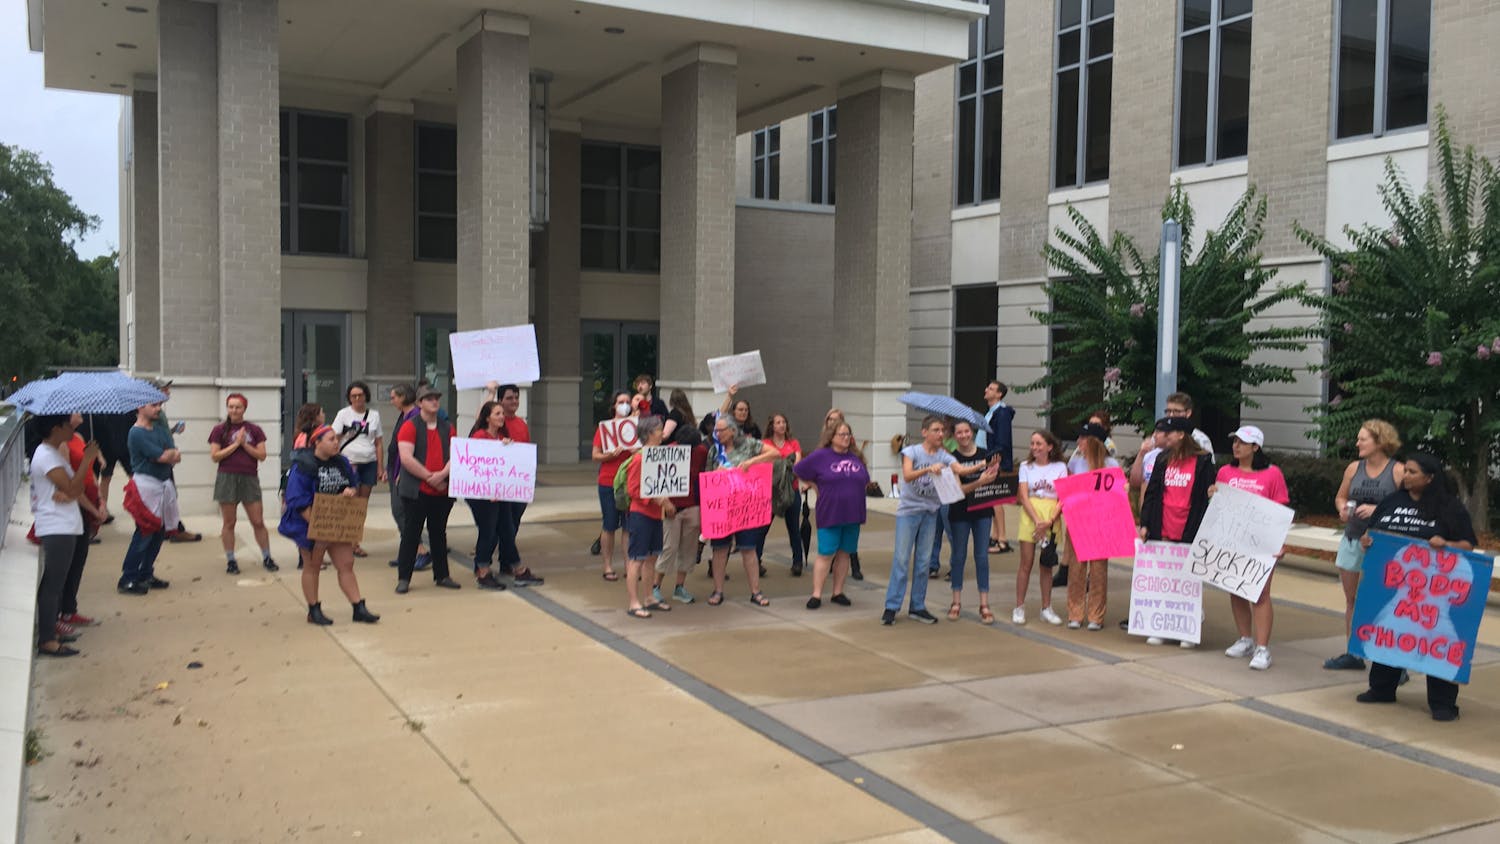 Protesters gather outside of the Stephan P. Mickle, Sr., Criminal Courthouse to protest the Supreme Court decision to overturn Roe v. Wade Friday, June 24, 2022.